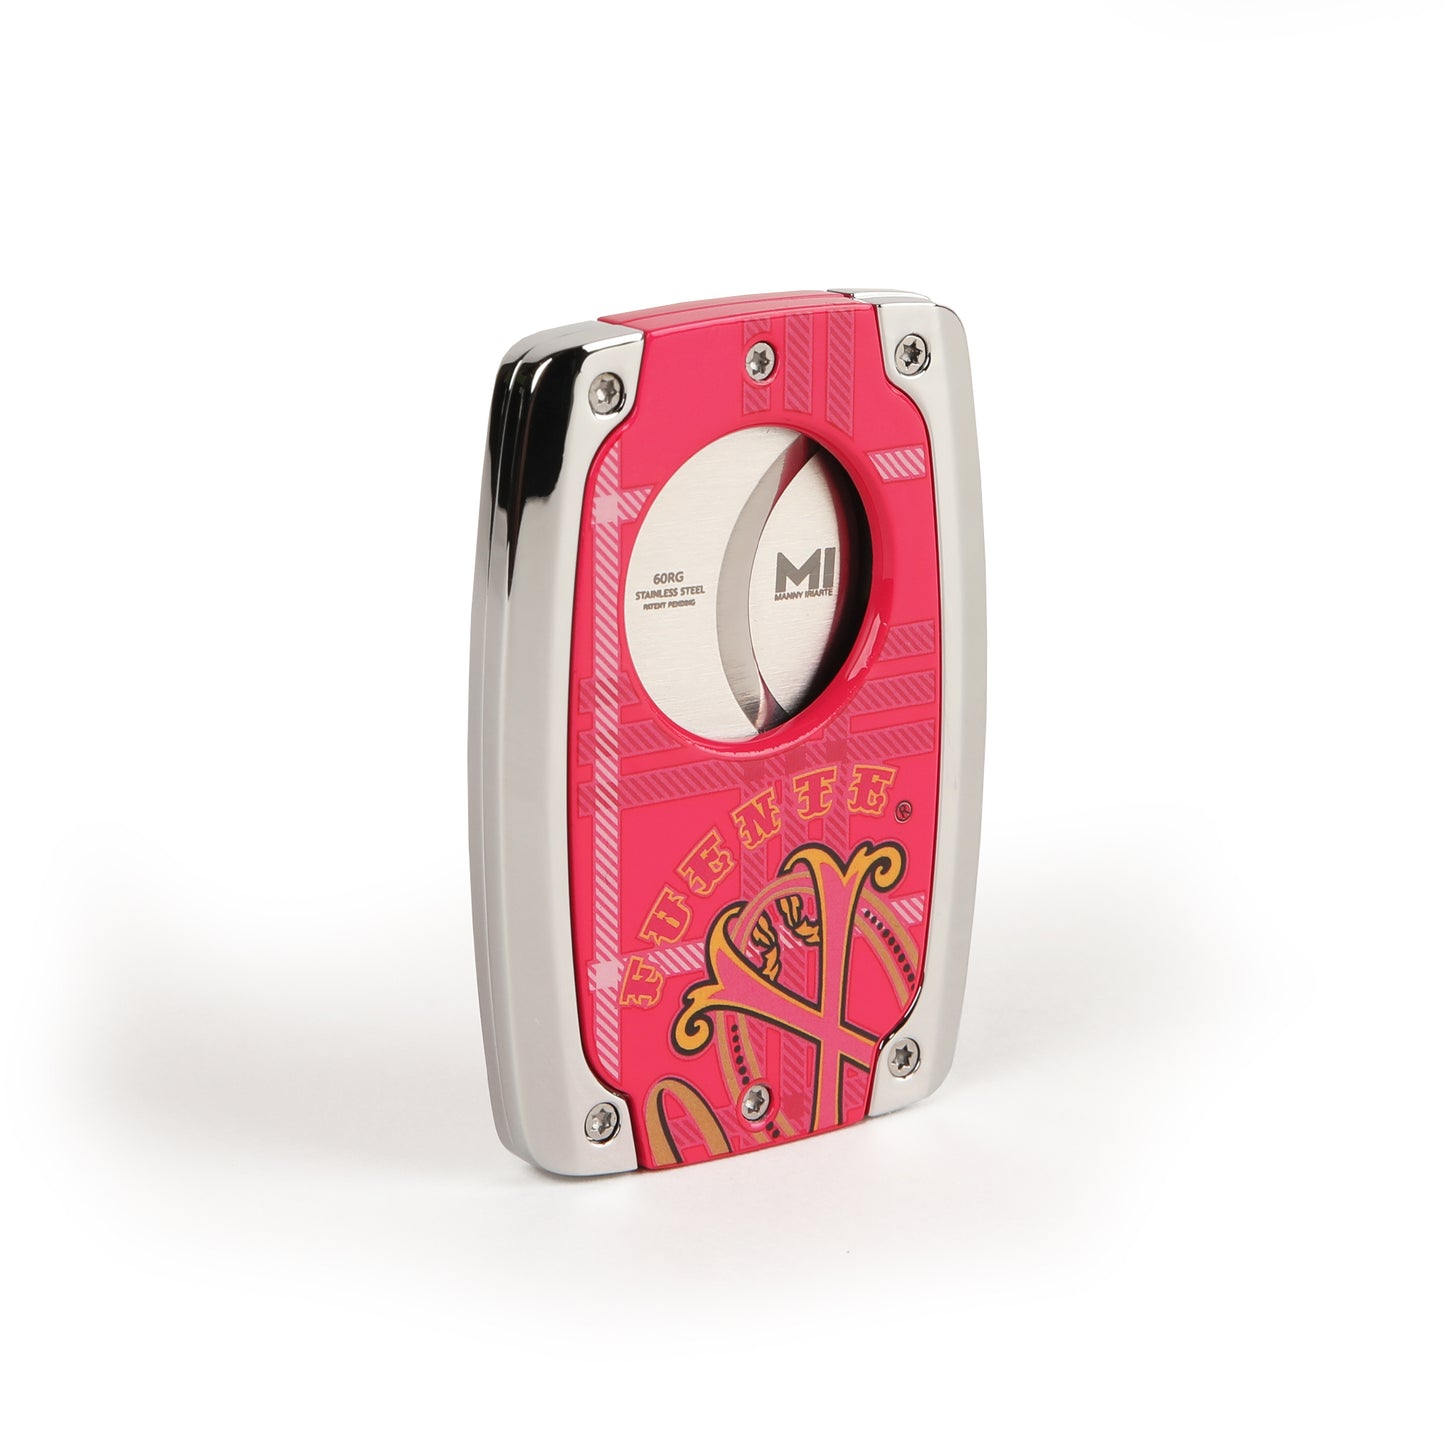 Fuente The OpusX Society OXS MI c30 Cutter - Rose